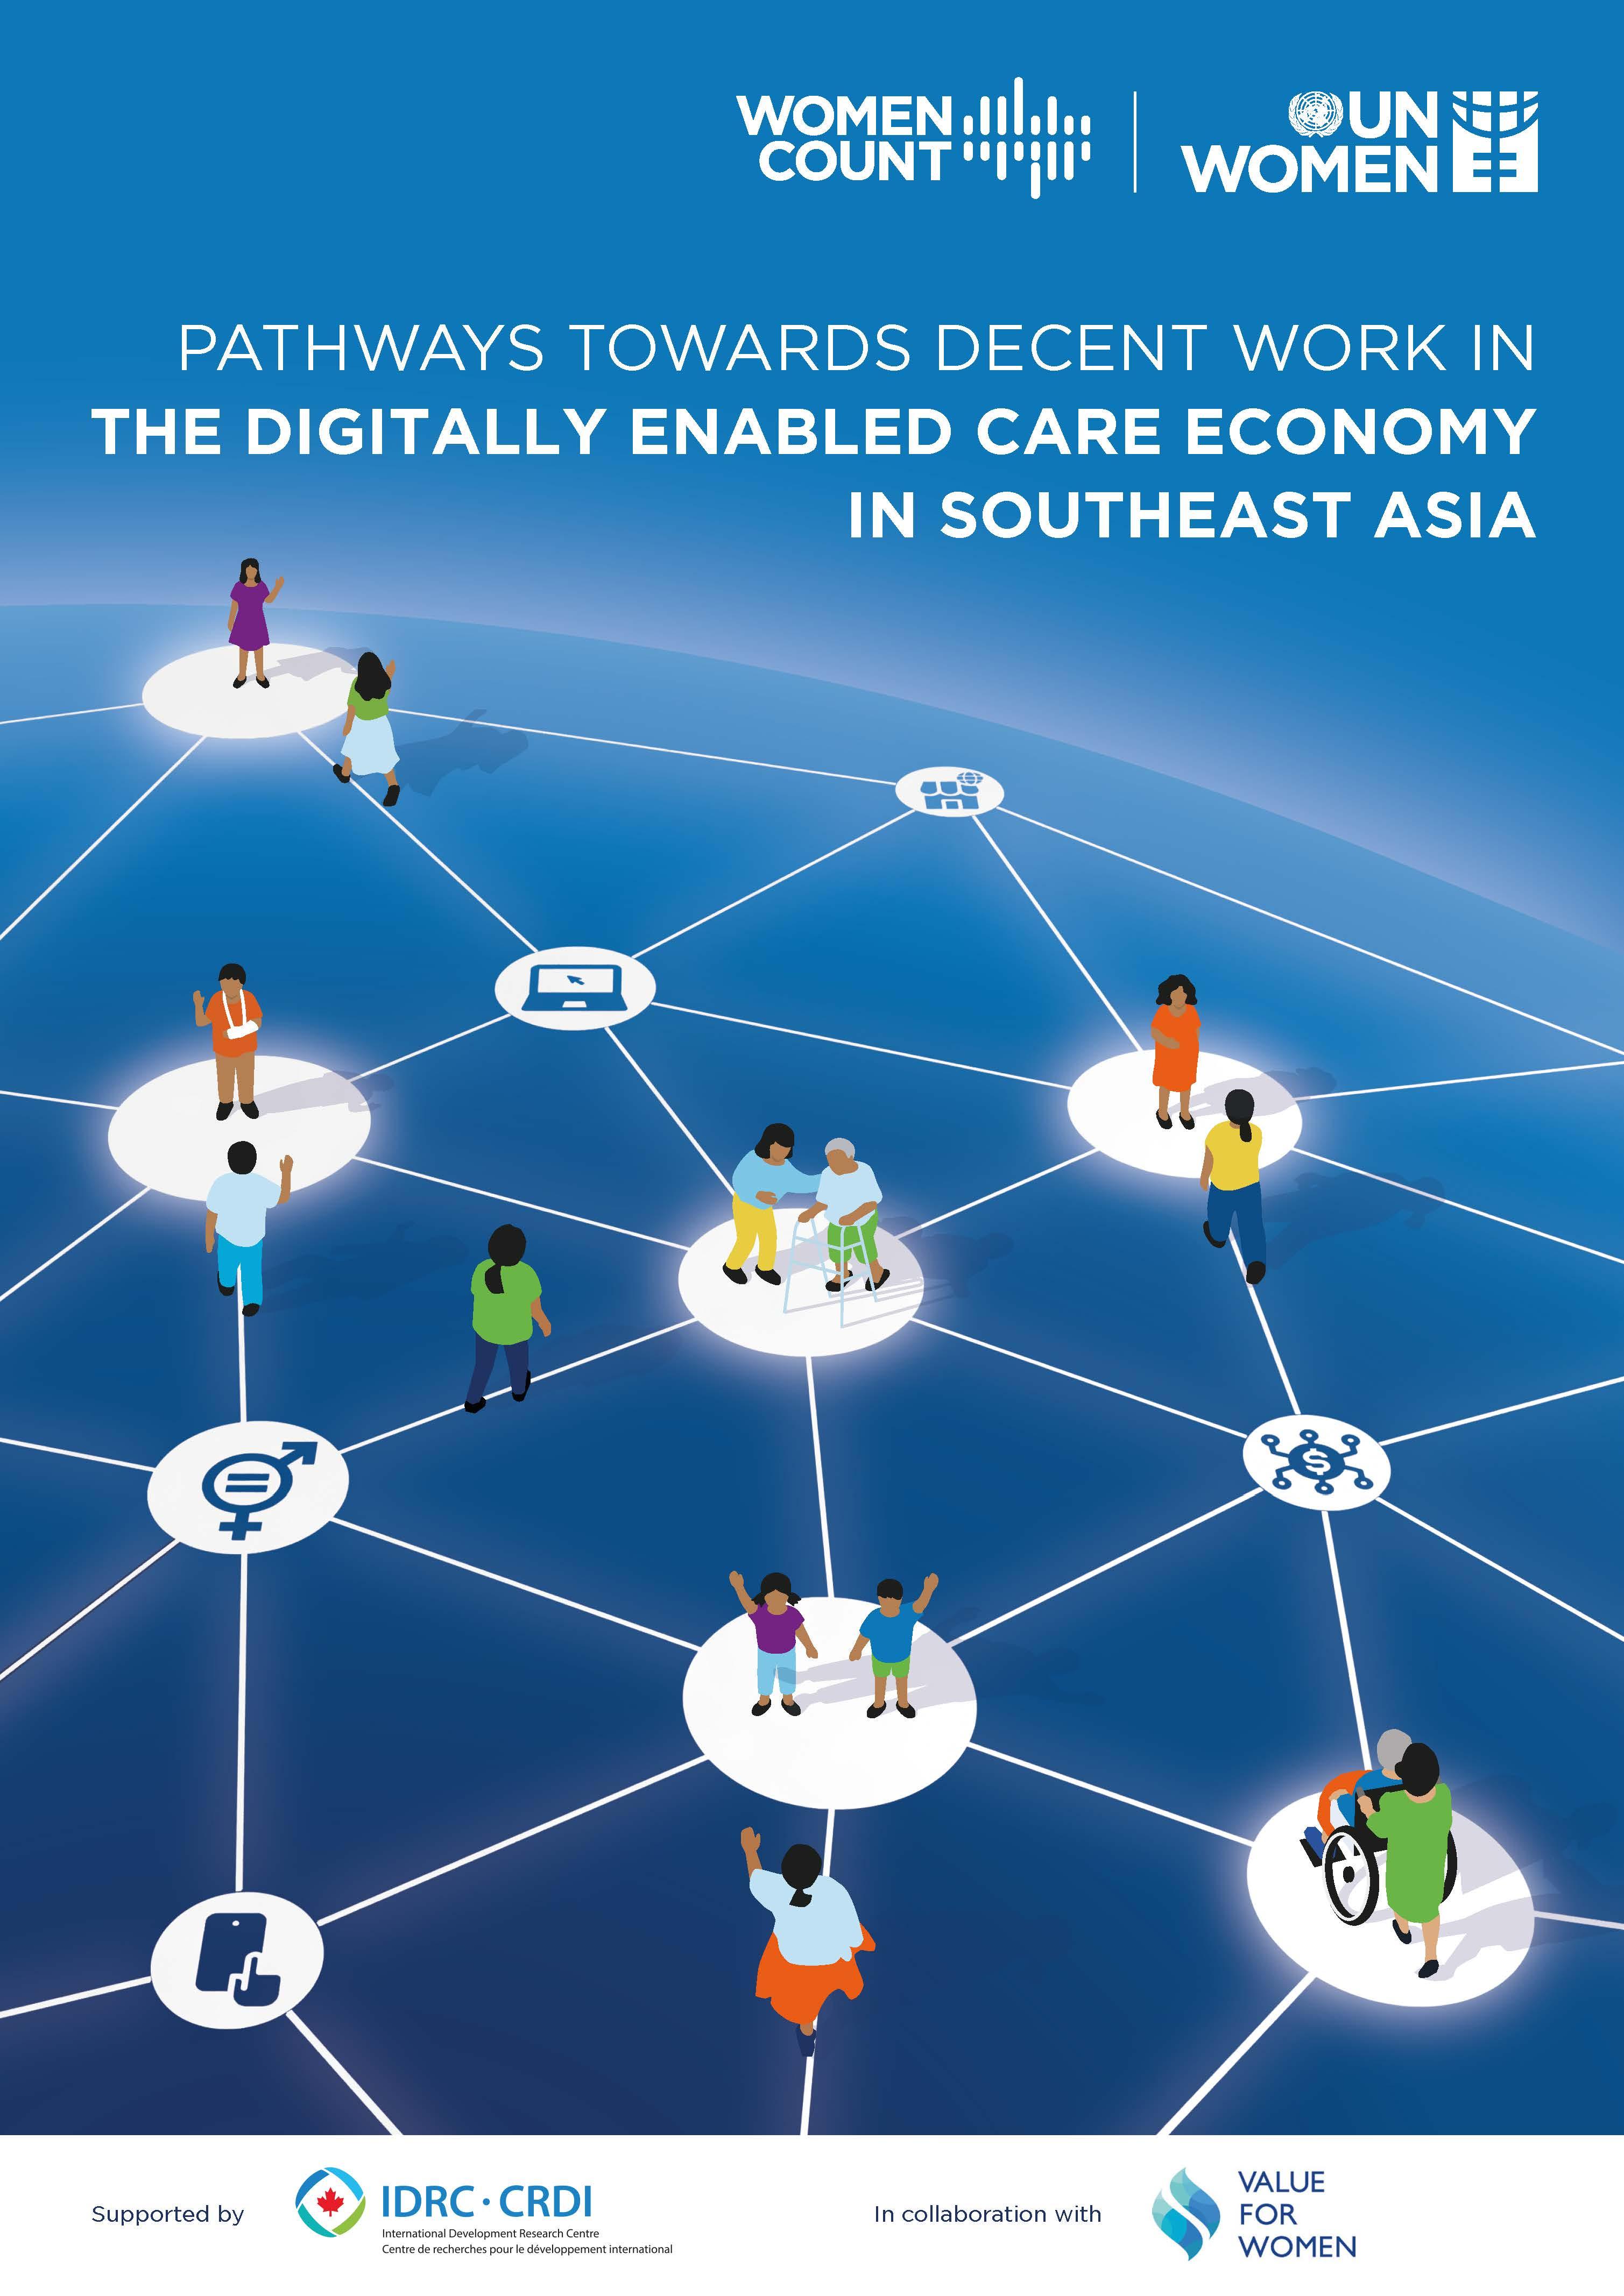 Pathways towards decent work in the digitally enabled care economy in Southeast Asia